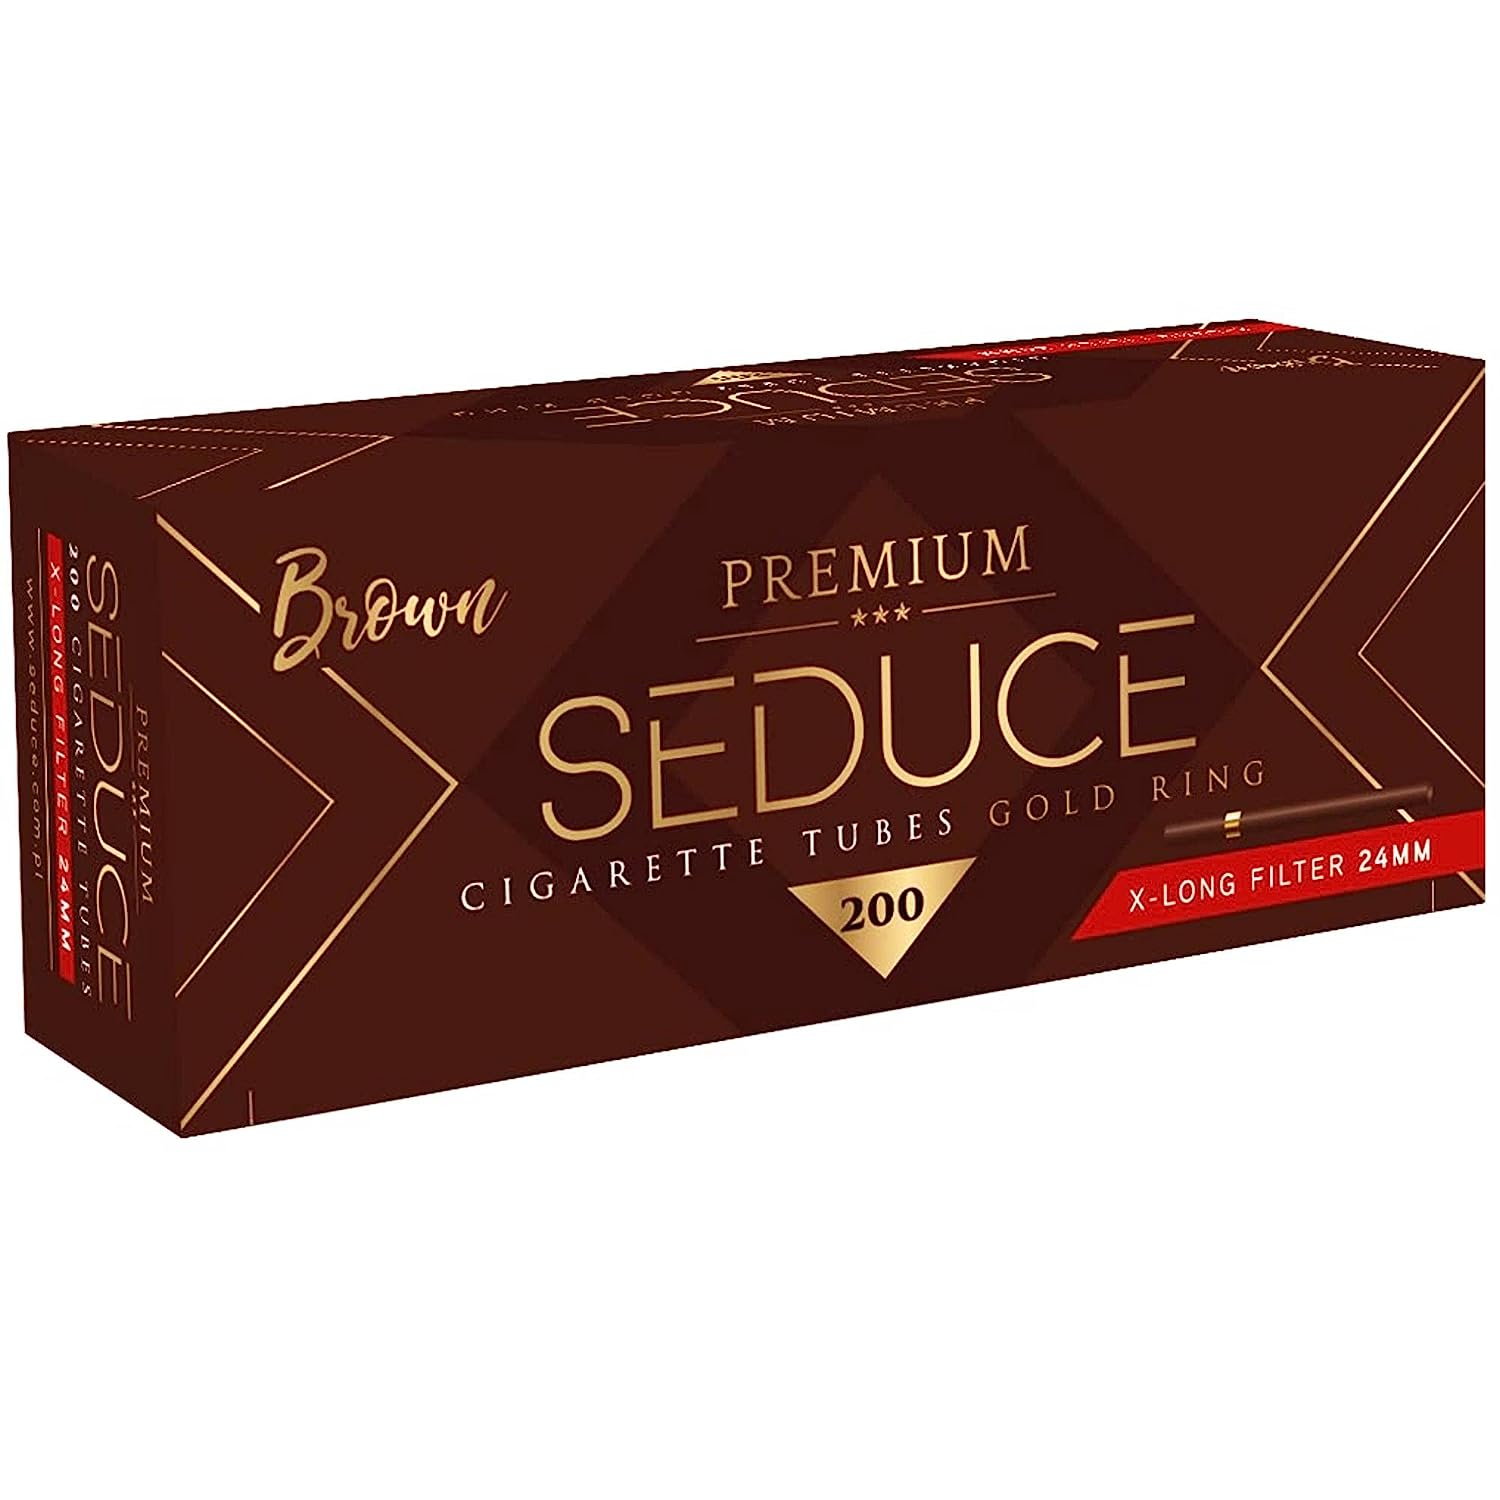 Seduce Premium - King Size 24 mm Pre rolled Cigarette Tubes with Brown Gold Ring